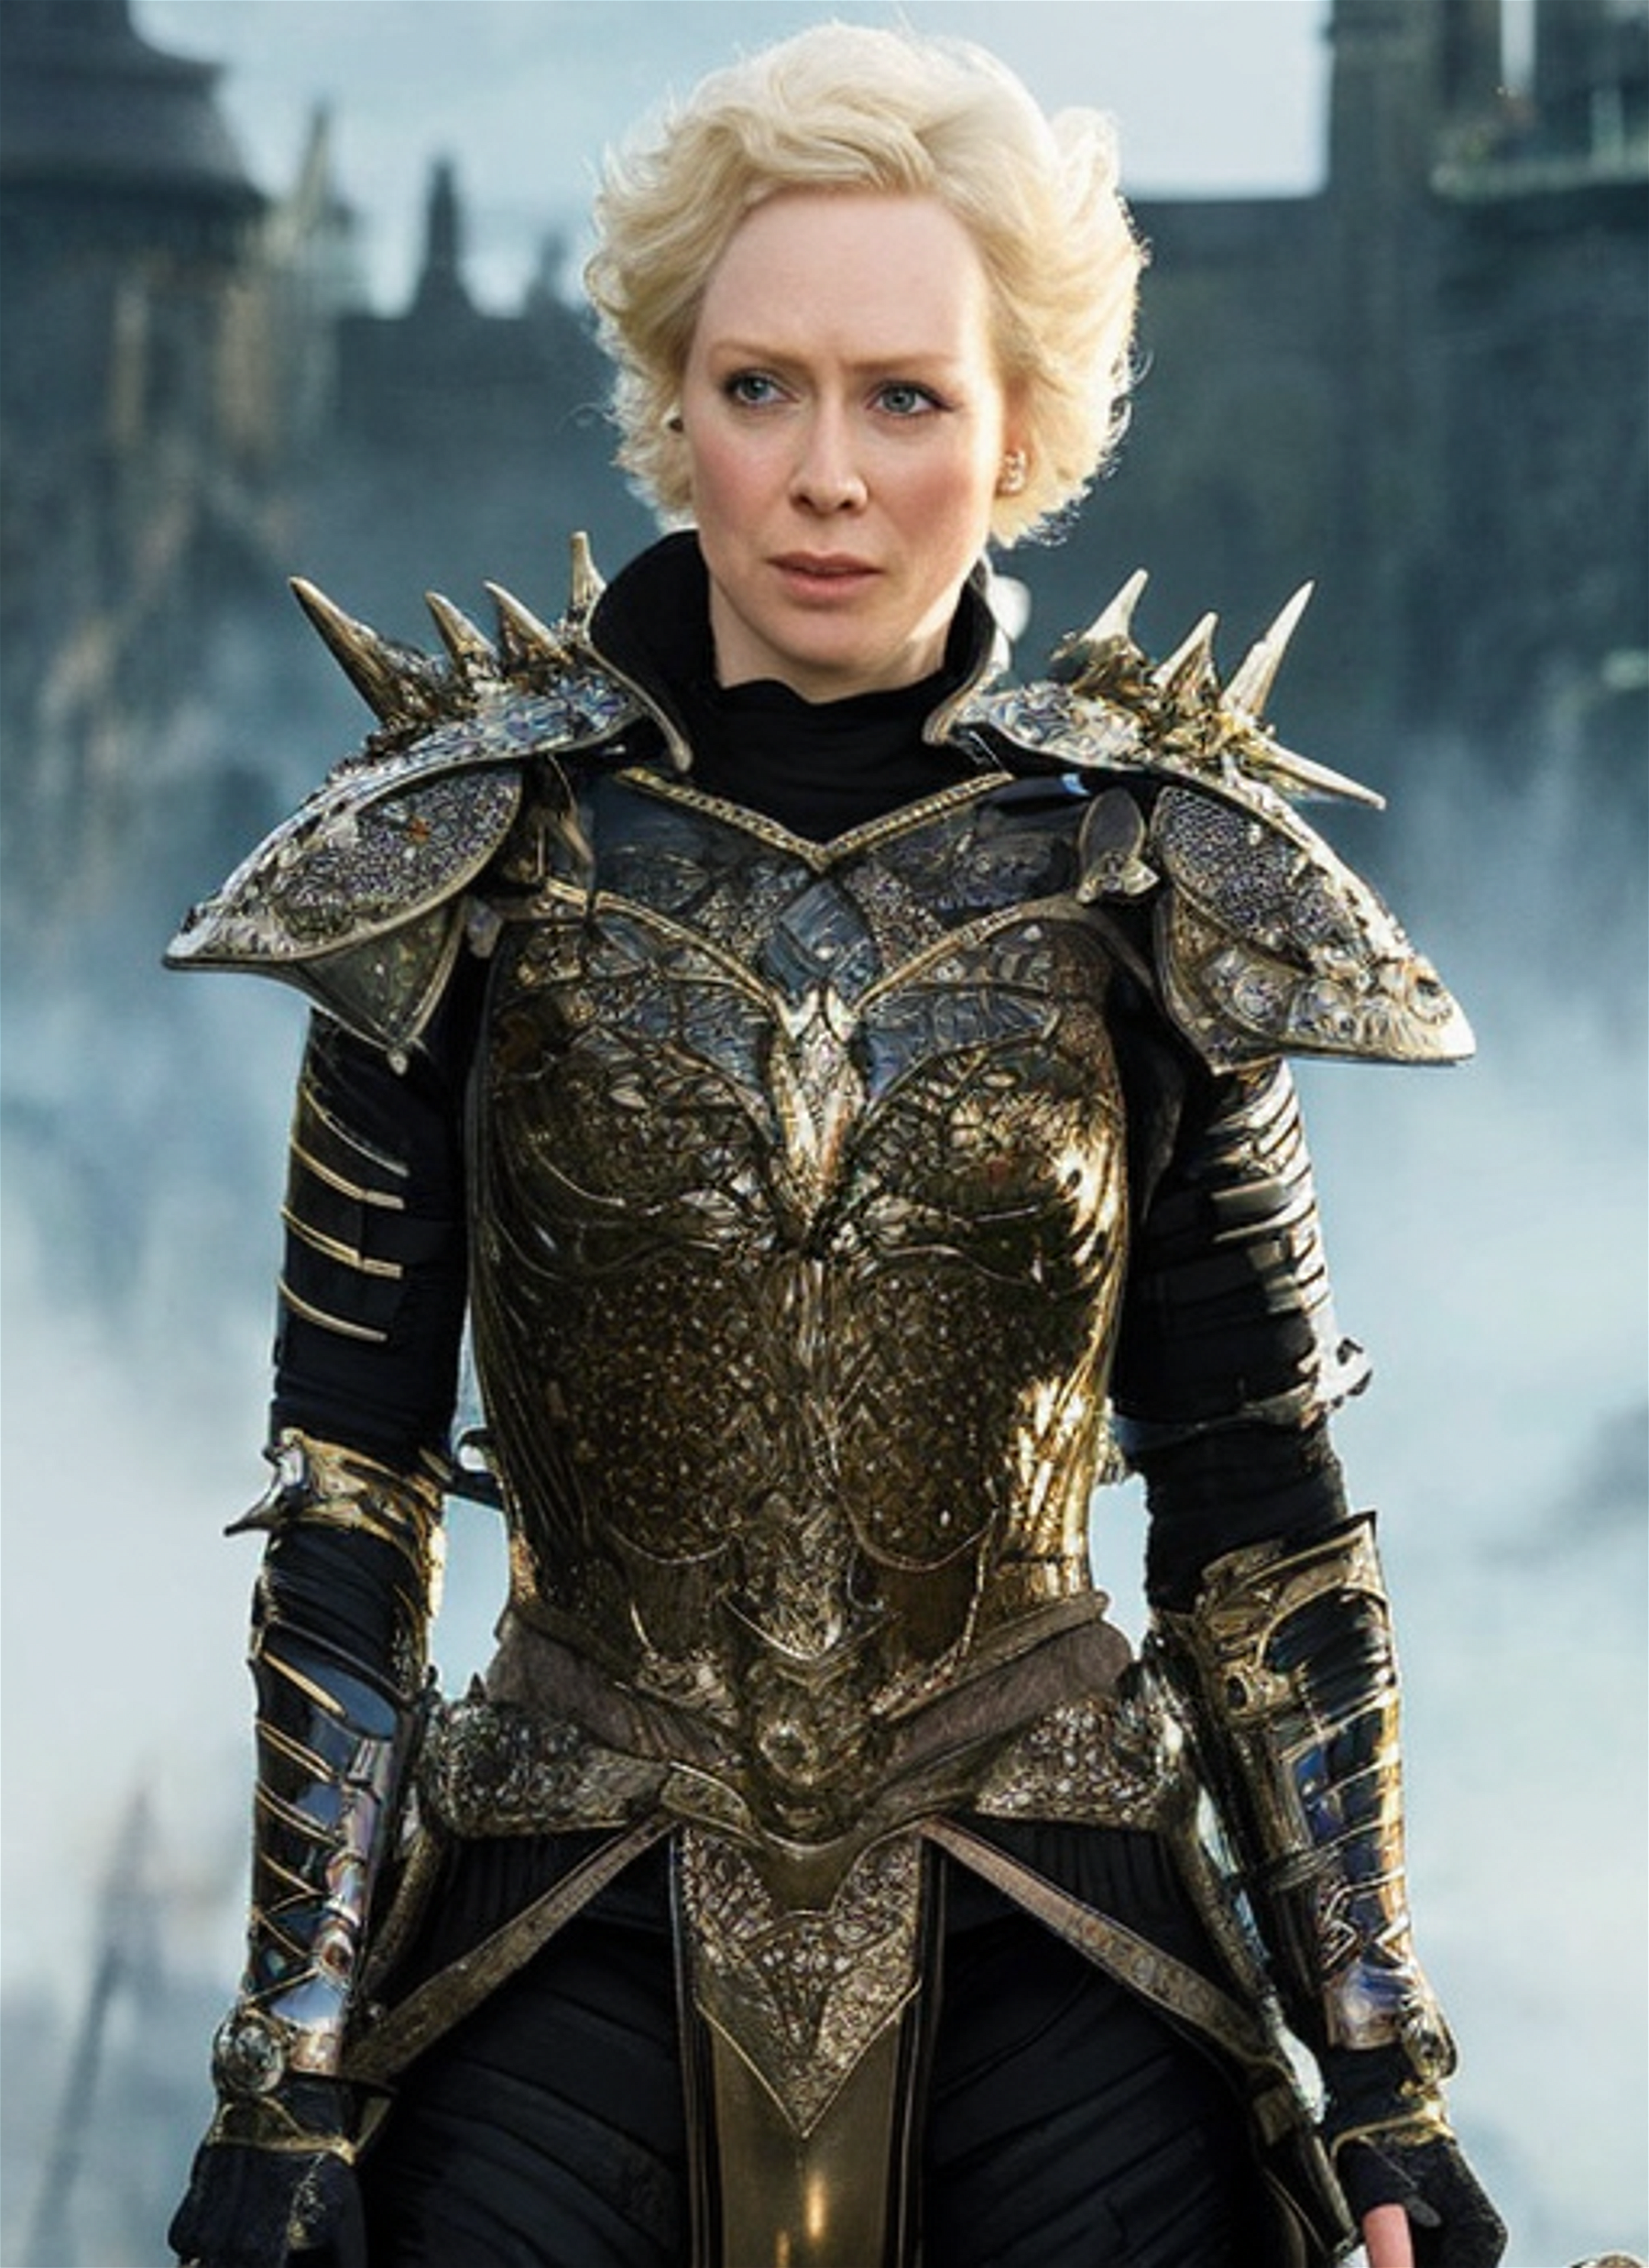 A hyperrealistic full body portrait of Gwendoline Christie in a regal and elegant pose, inspired by the work of Yoshitaka Amano and Hidetaka Miyazaki, with intricate and detailed armor, in a fantasy and medieval theme.